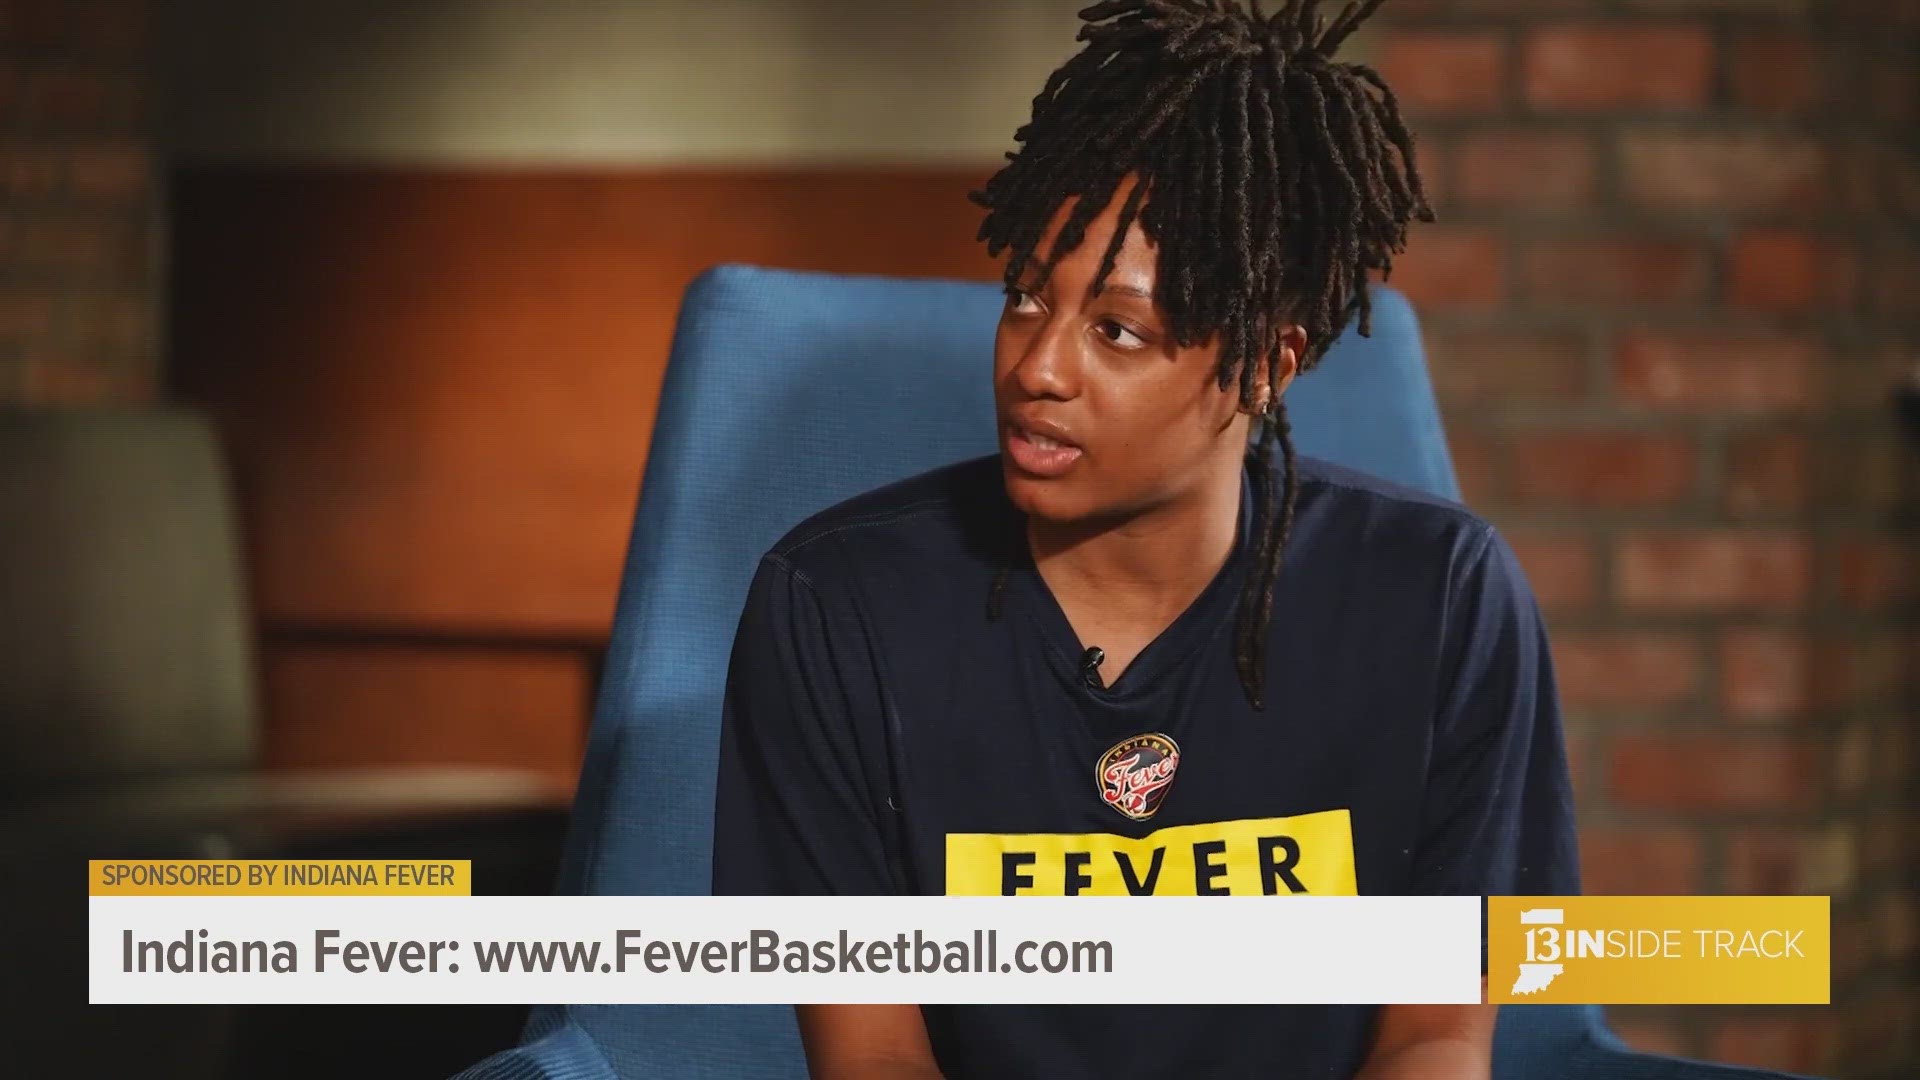 Explore the passion and spirit of Indiana Fever's Guard Kelsey Mitchell, whose remarkable on-court performance is equally matched by her commitment to giving back.